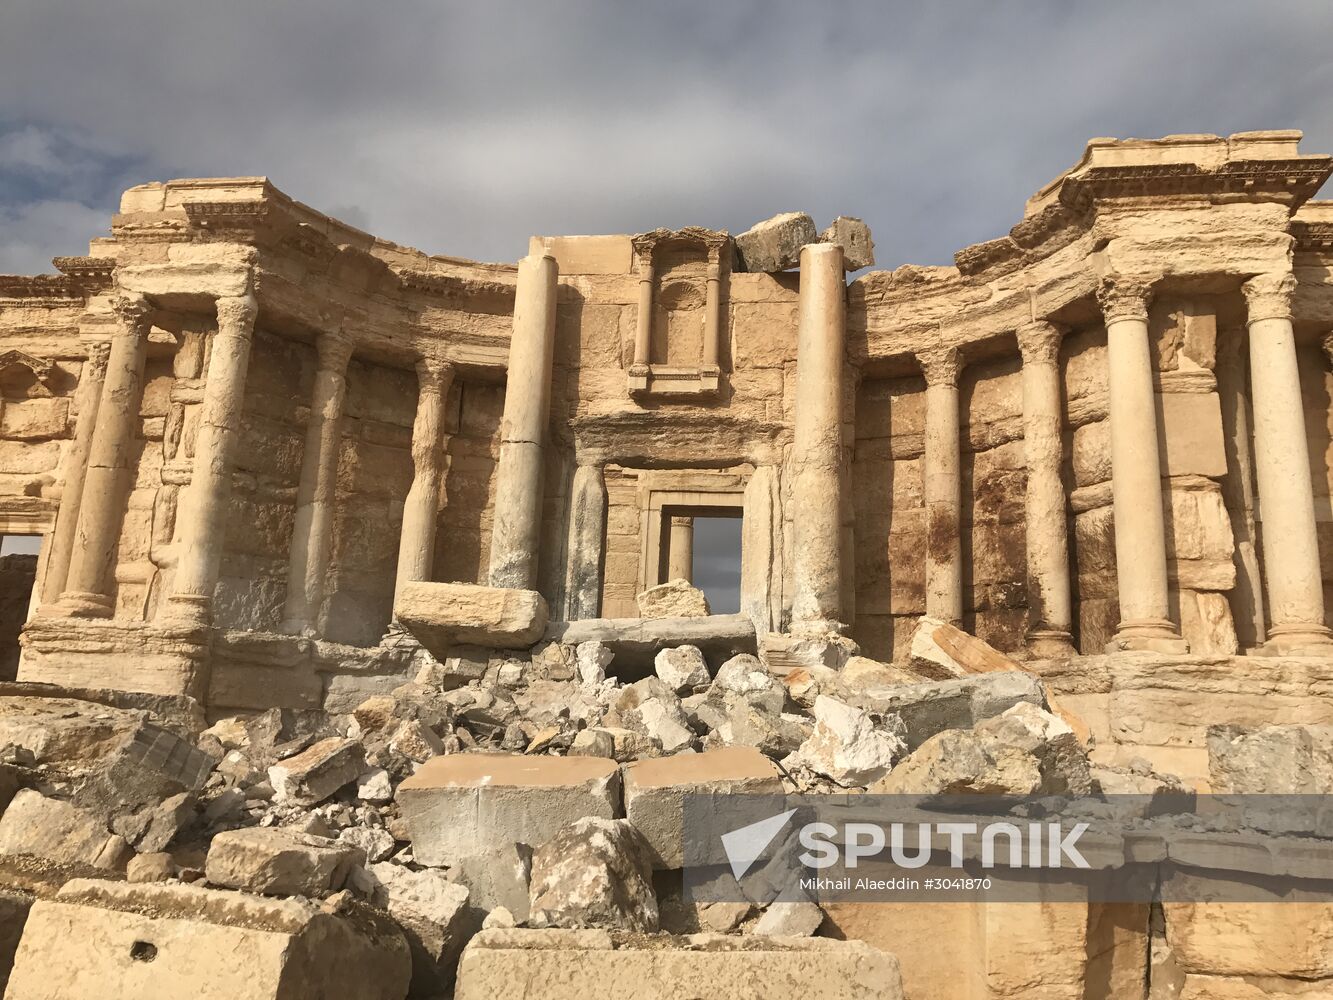 Palmyra recaptured by Syrian Arab Republic forces backed by Russian Aerospace Force